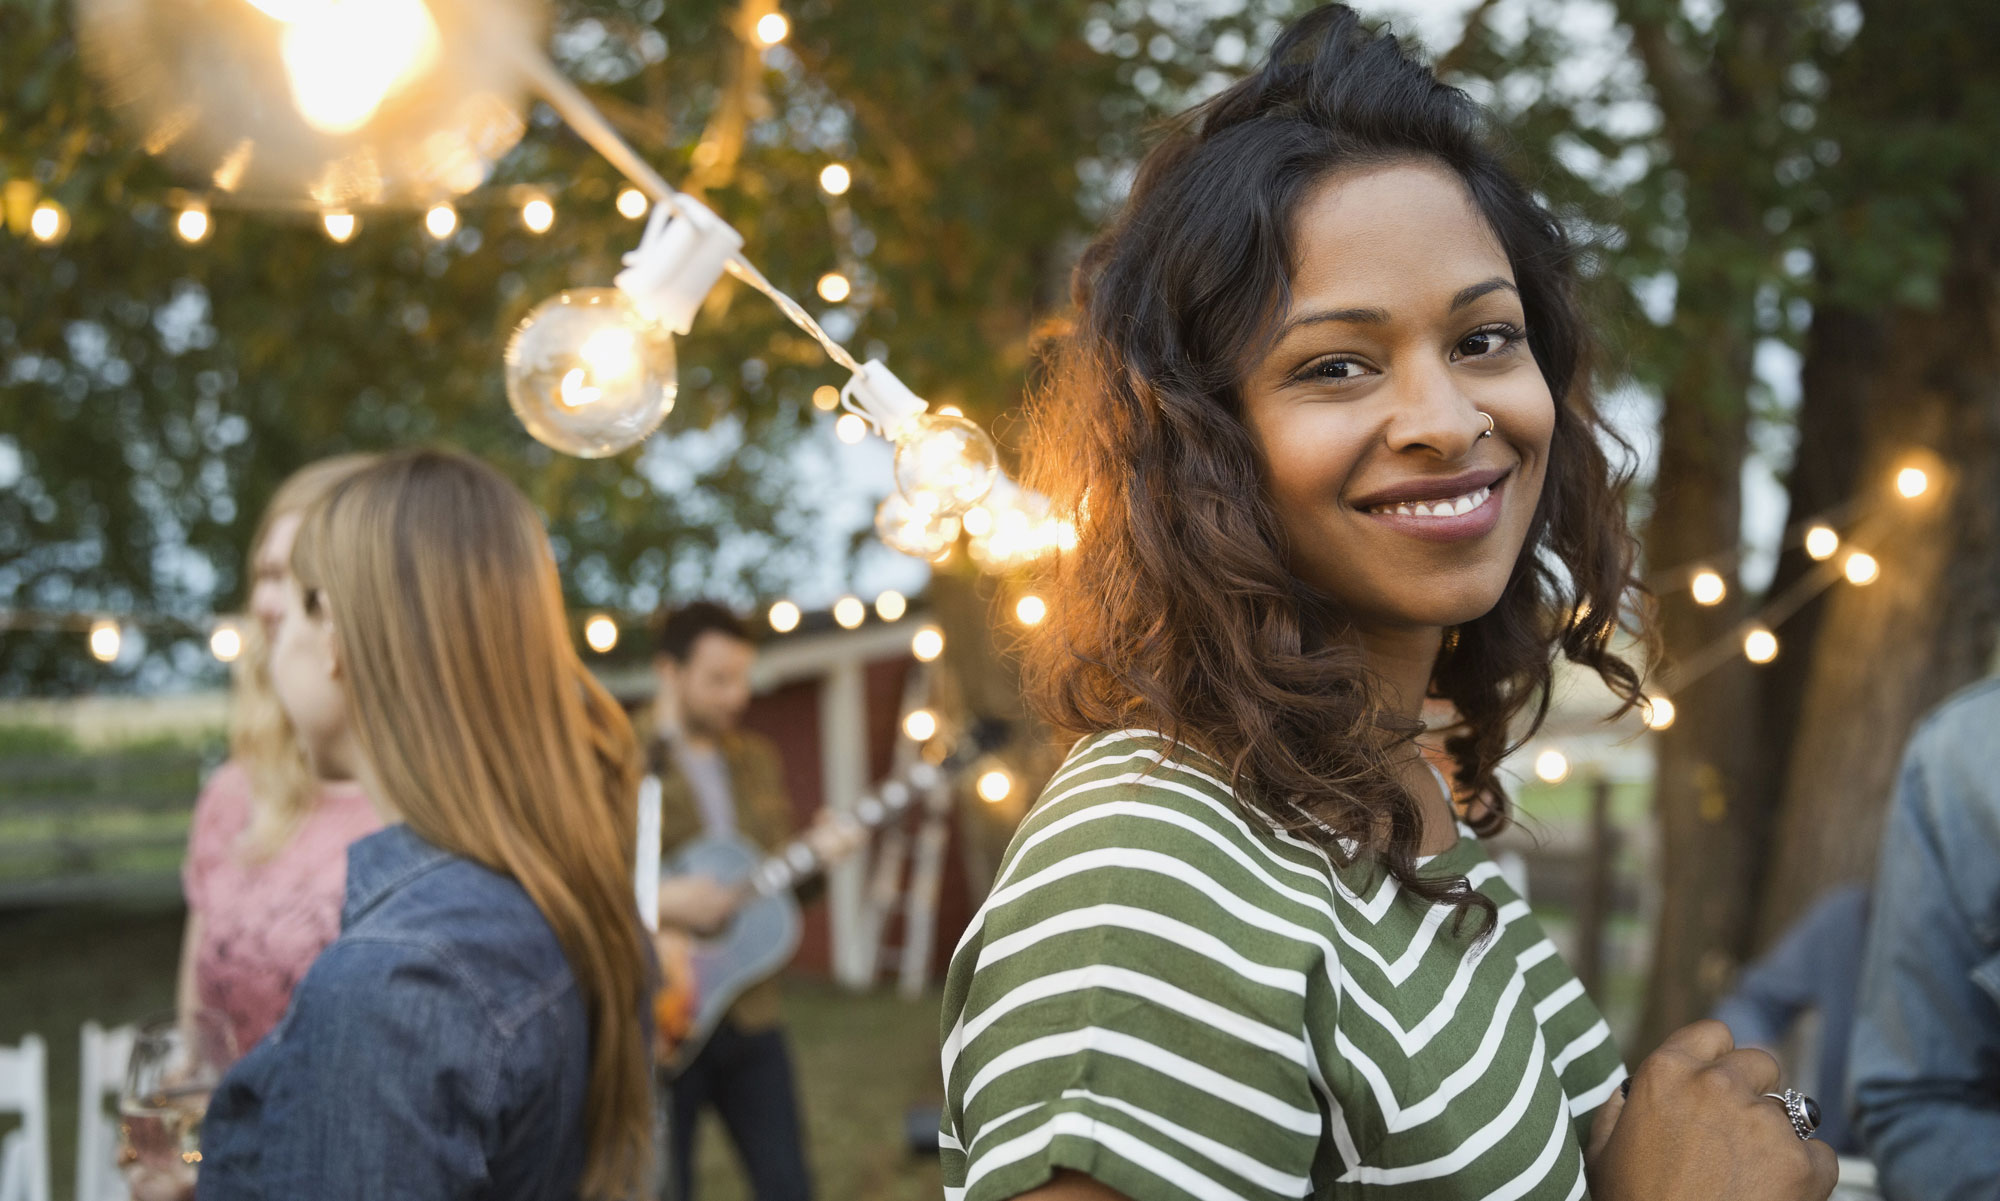 Smiling woman at an outdoor party